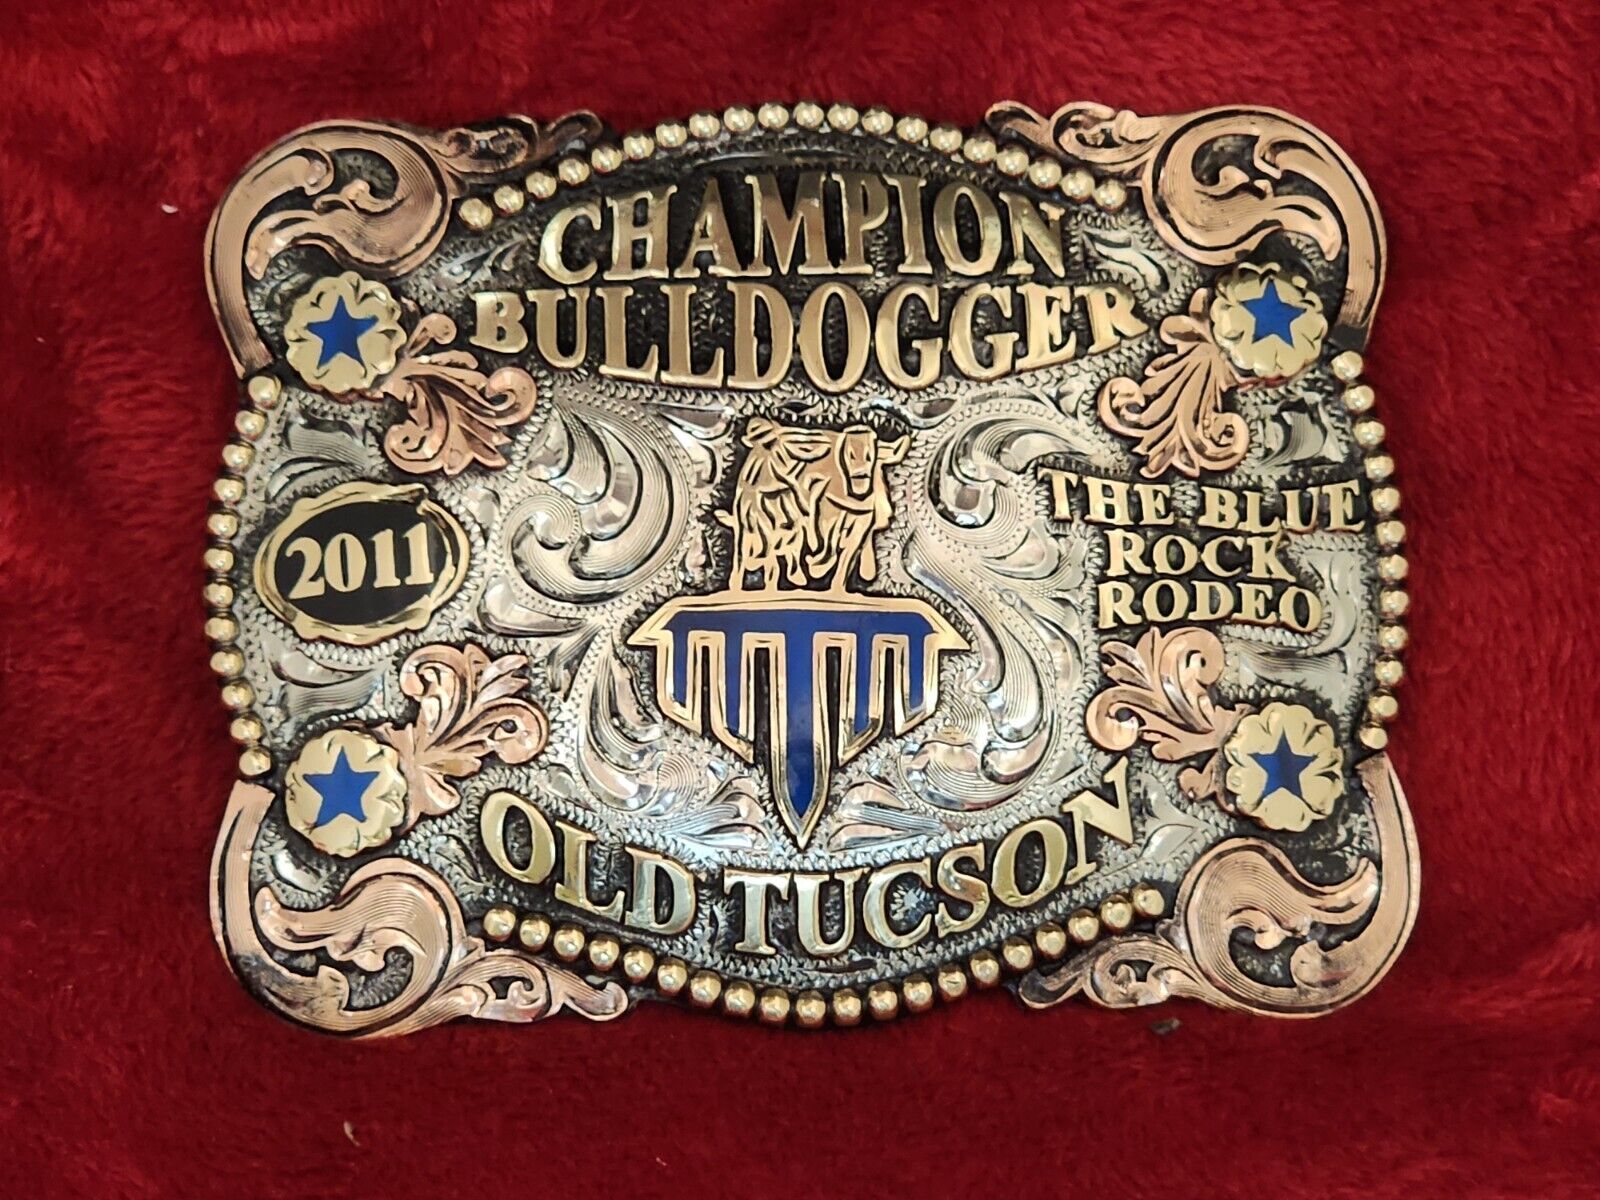 BULLDOGGING PROFESSIONAL RODEO CHAMPION TROPHY BUCKLE☆OLD TUCSON☆RARE☆2011☆353